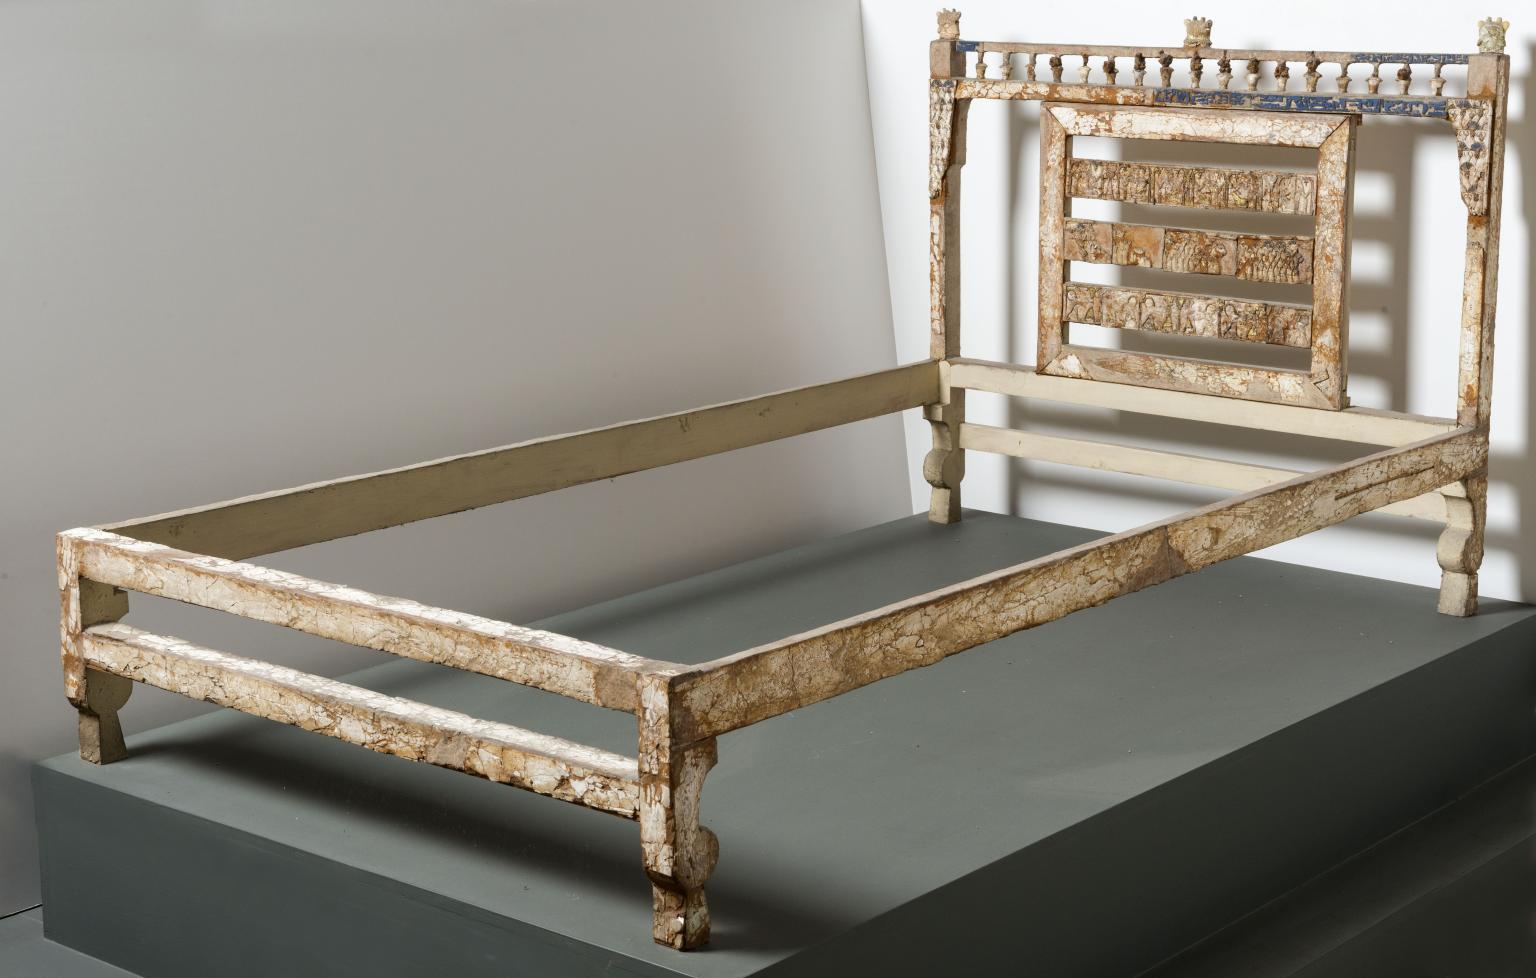 Bed frame decorated with ivory inlay with elaborate carving on headboard.